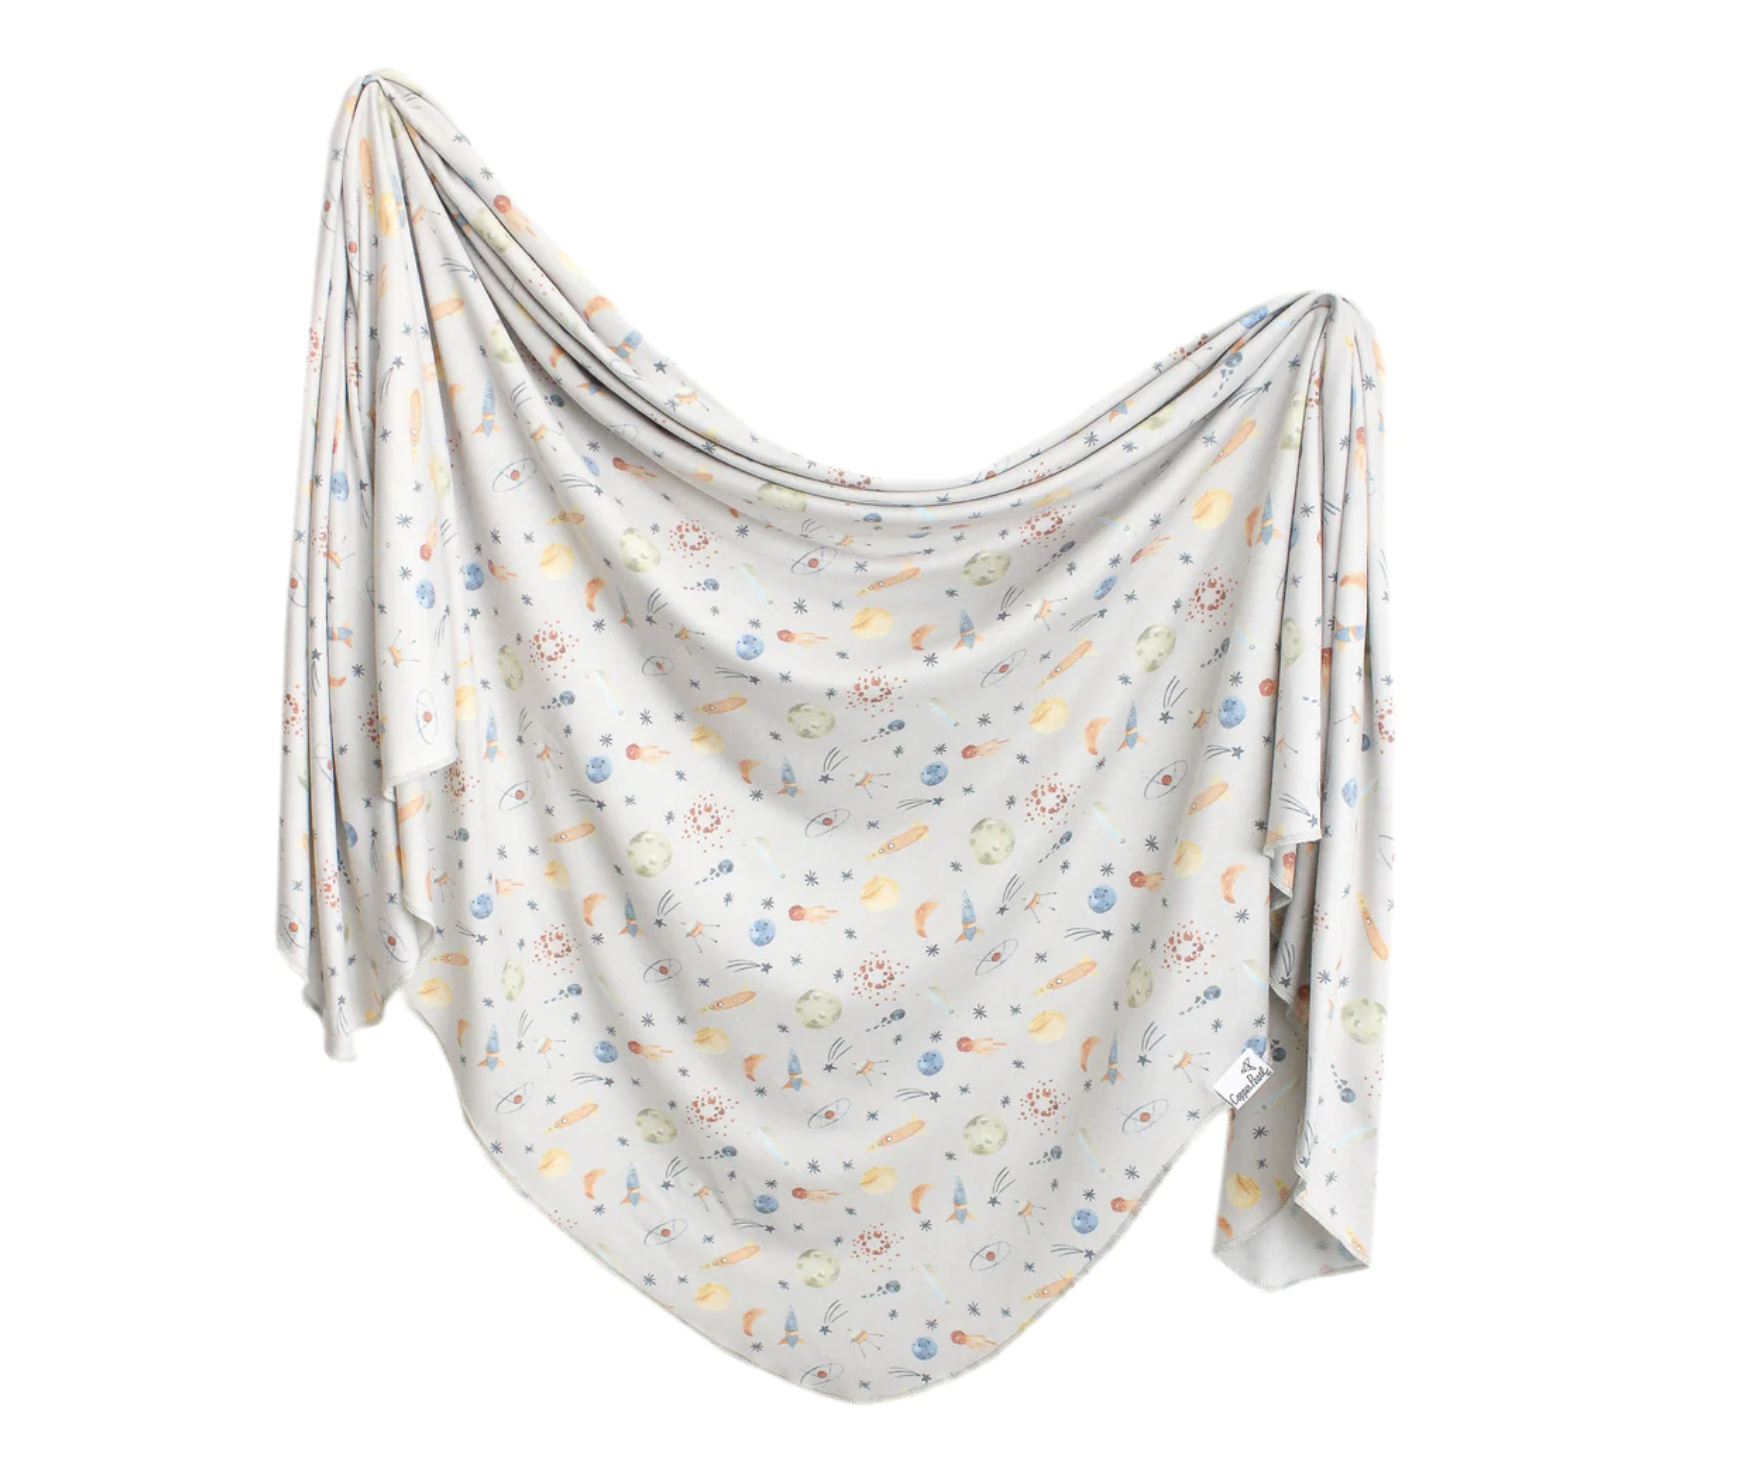 Copper Pearl Cosmos Swaddle Blanket